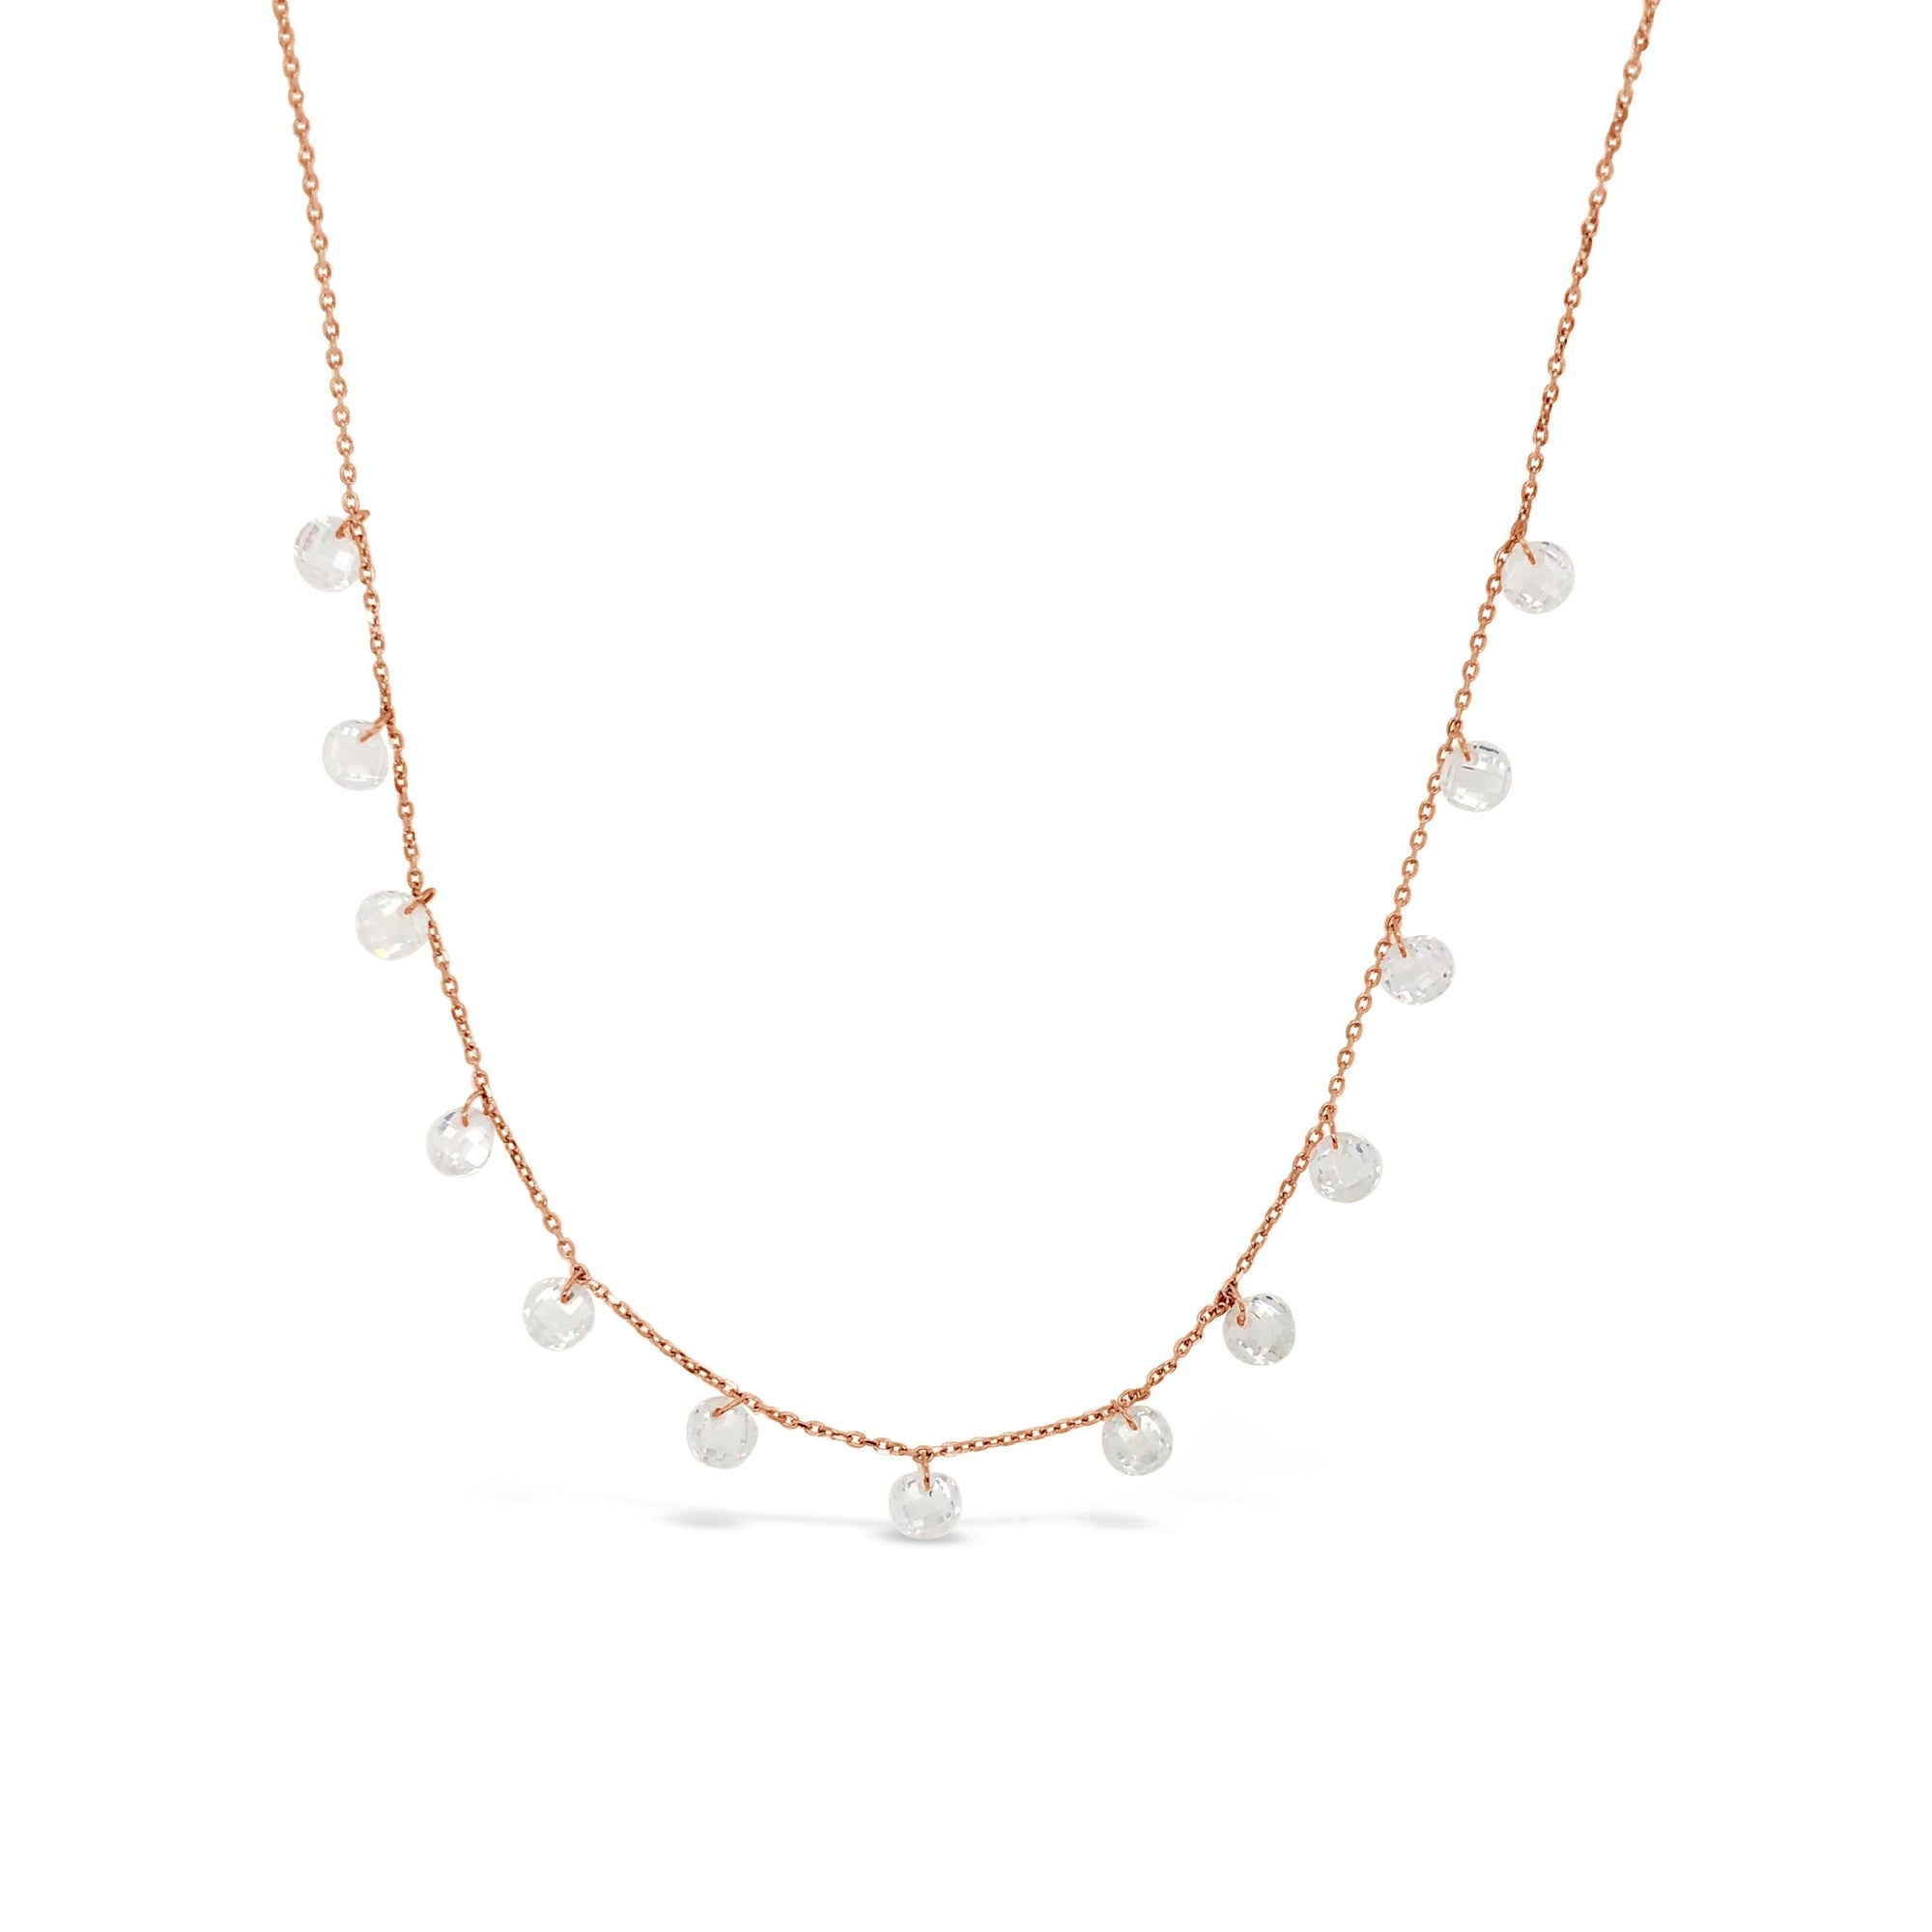 Duo Jewellery Necklaces Rose Gold Duo lucky Number Rose Necklace